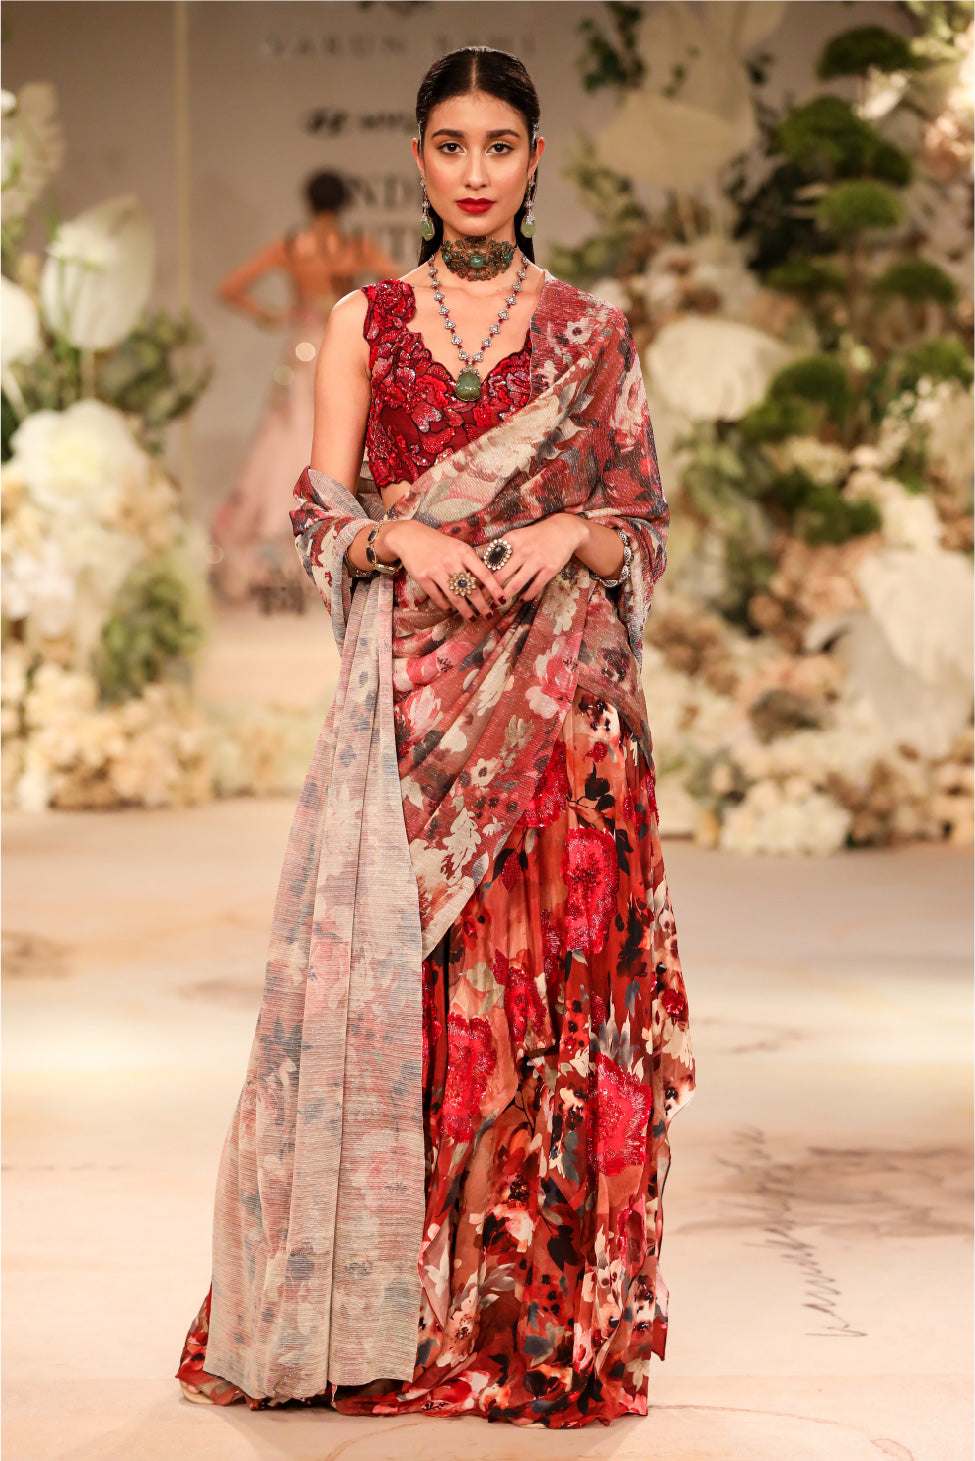 RED PRINTED SAREE GOWN WITH EMBROIDERED BODICE